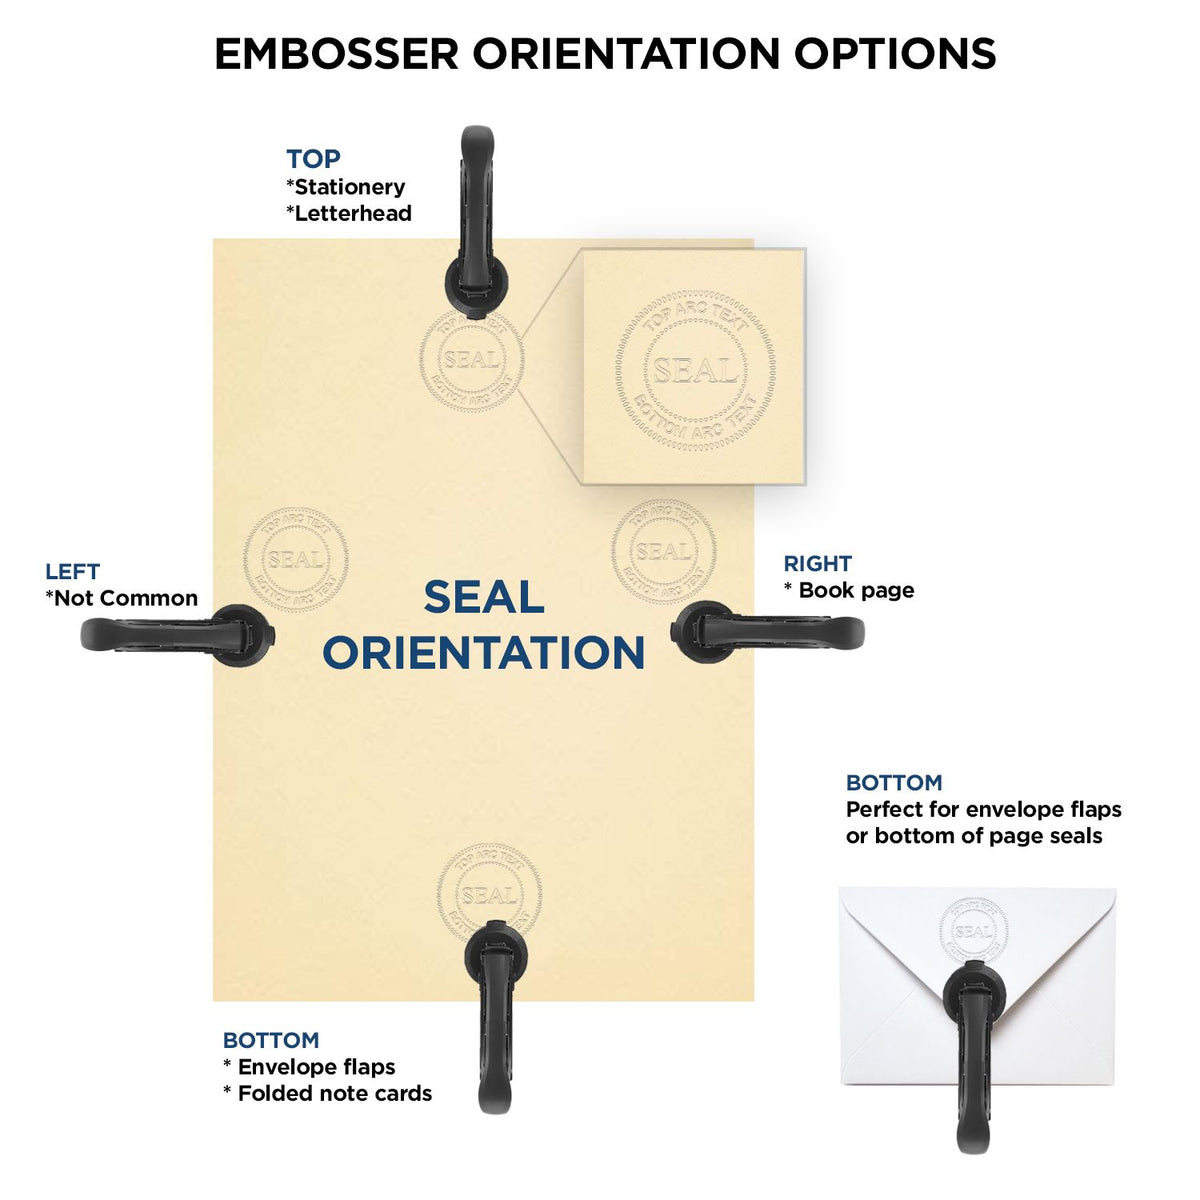 An infographic for the Handheld South Dakota Architect Seal Embosser showing embosser orientation, this is showing examples of a top, bottom, right and left insert.